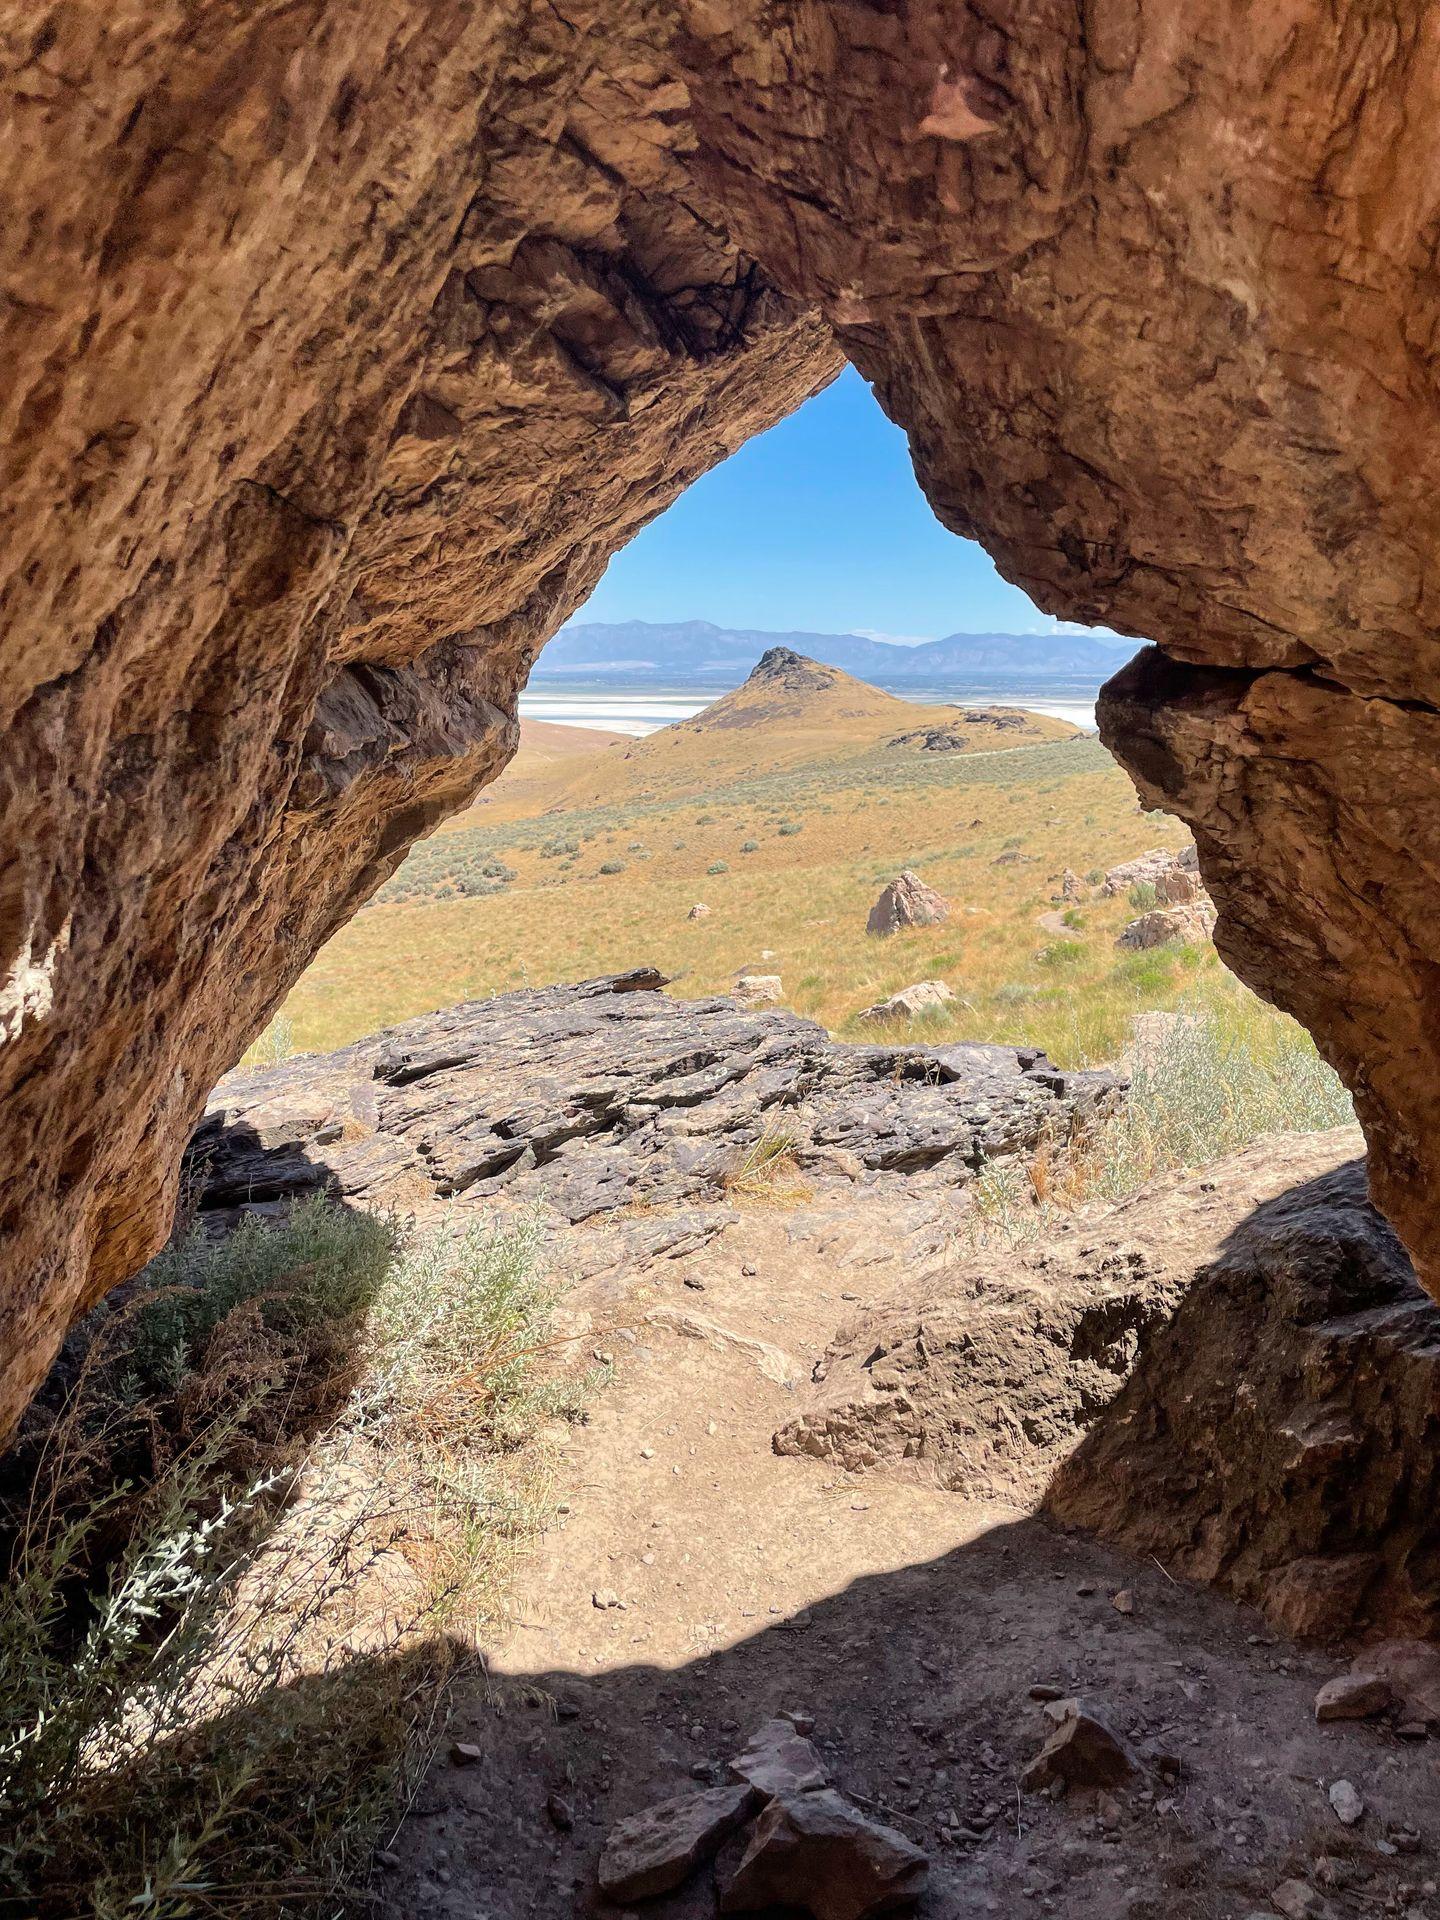 Looking through a rock tunnel on the Frary Peak hiking trail.